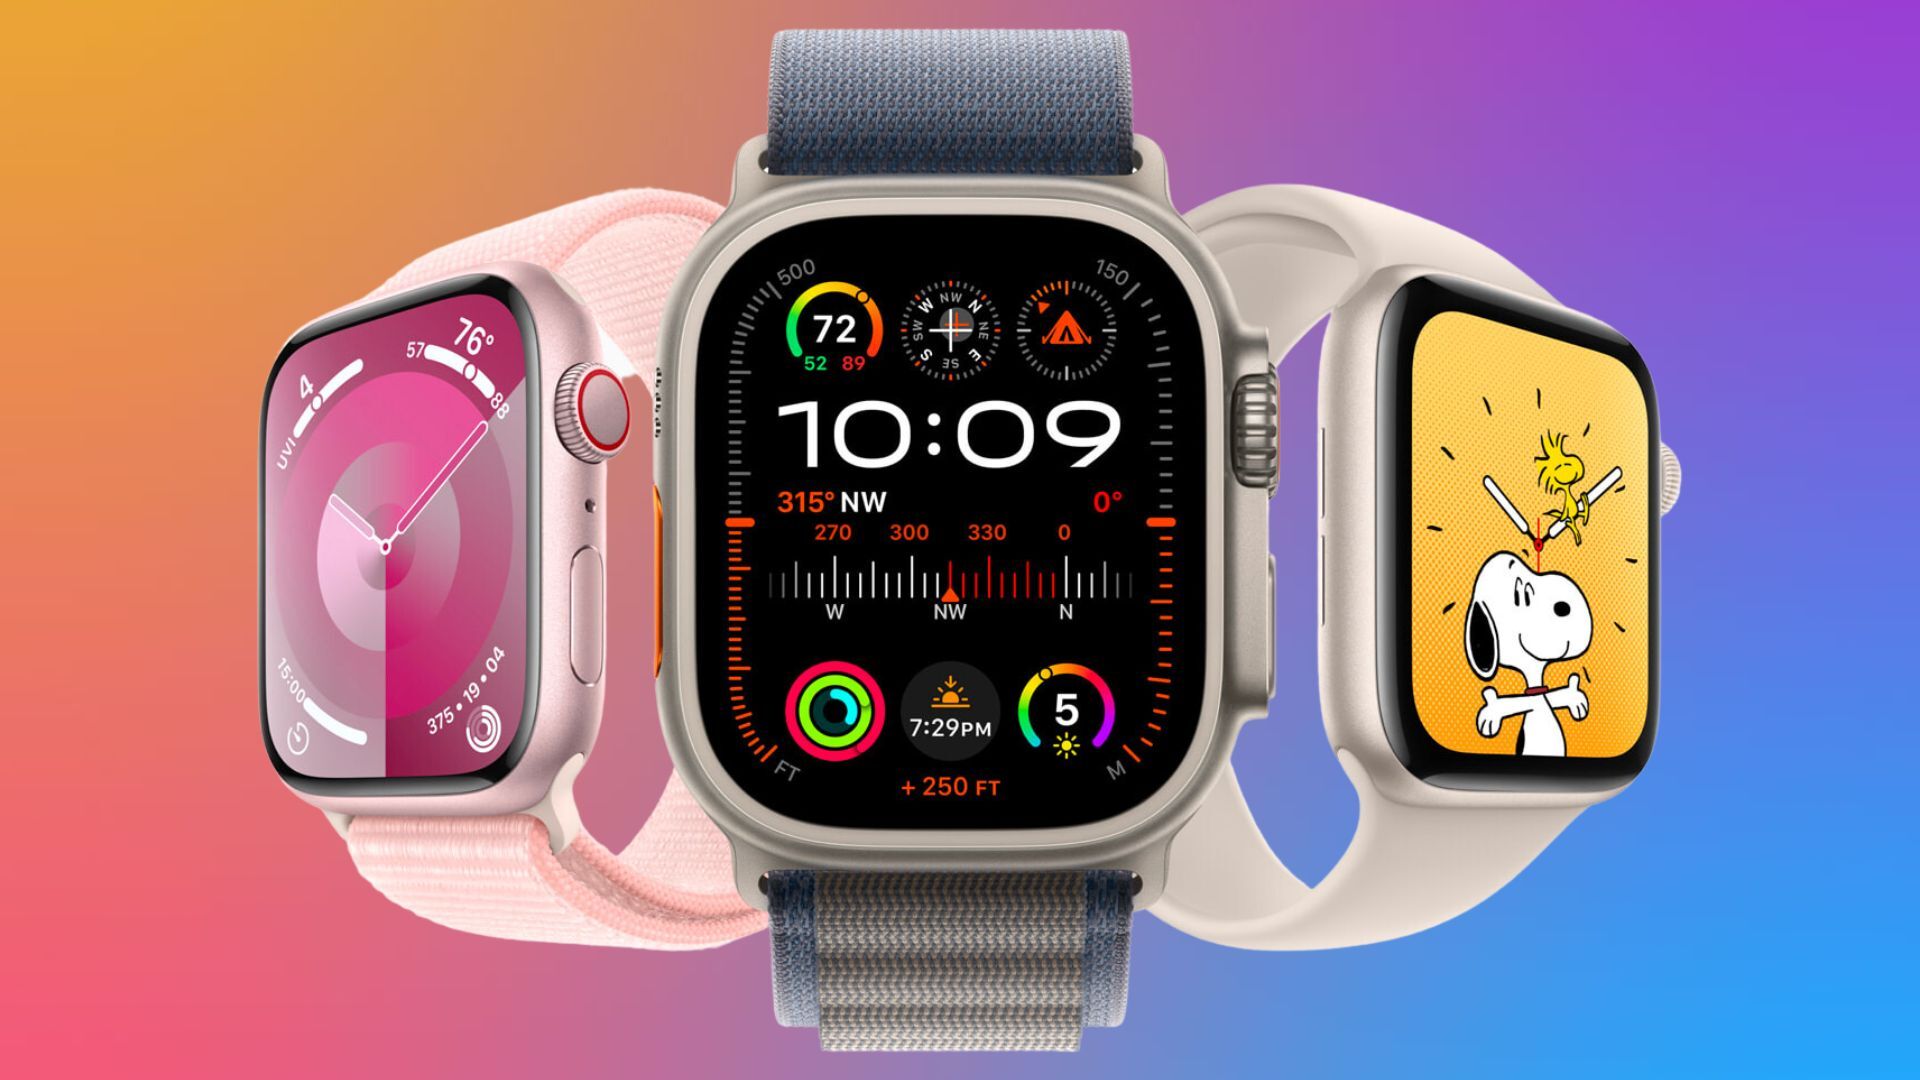 How to change color saturation on Apple Watch faces